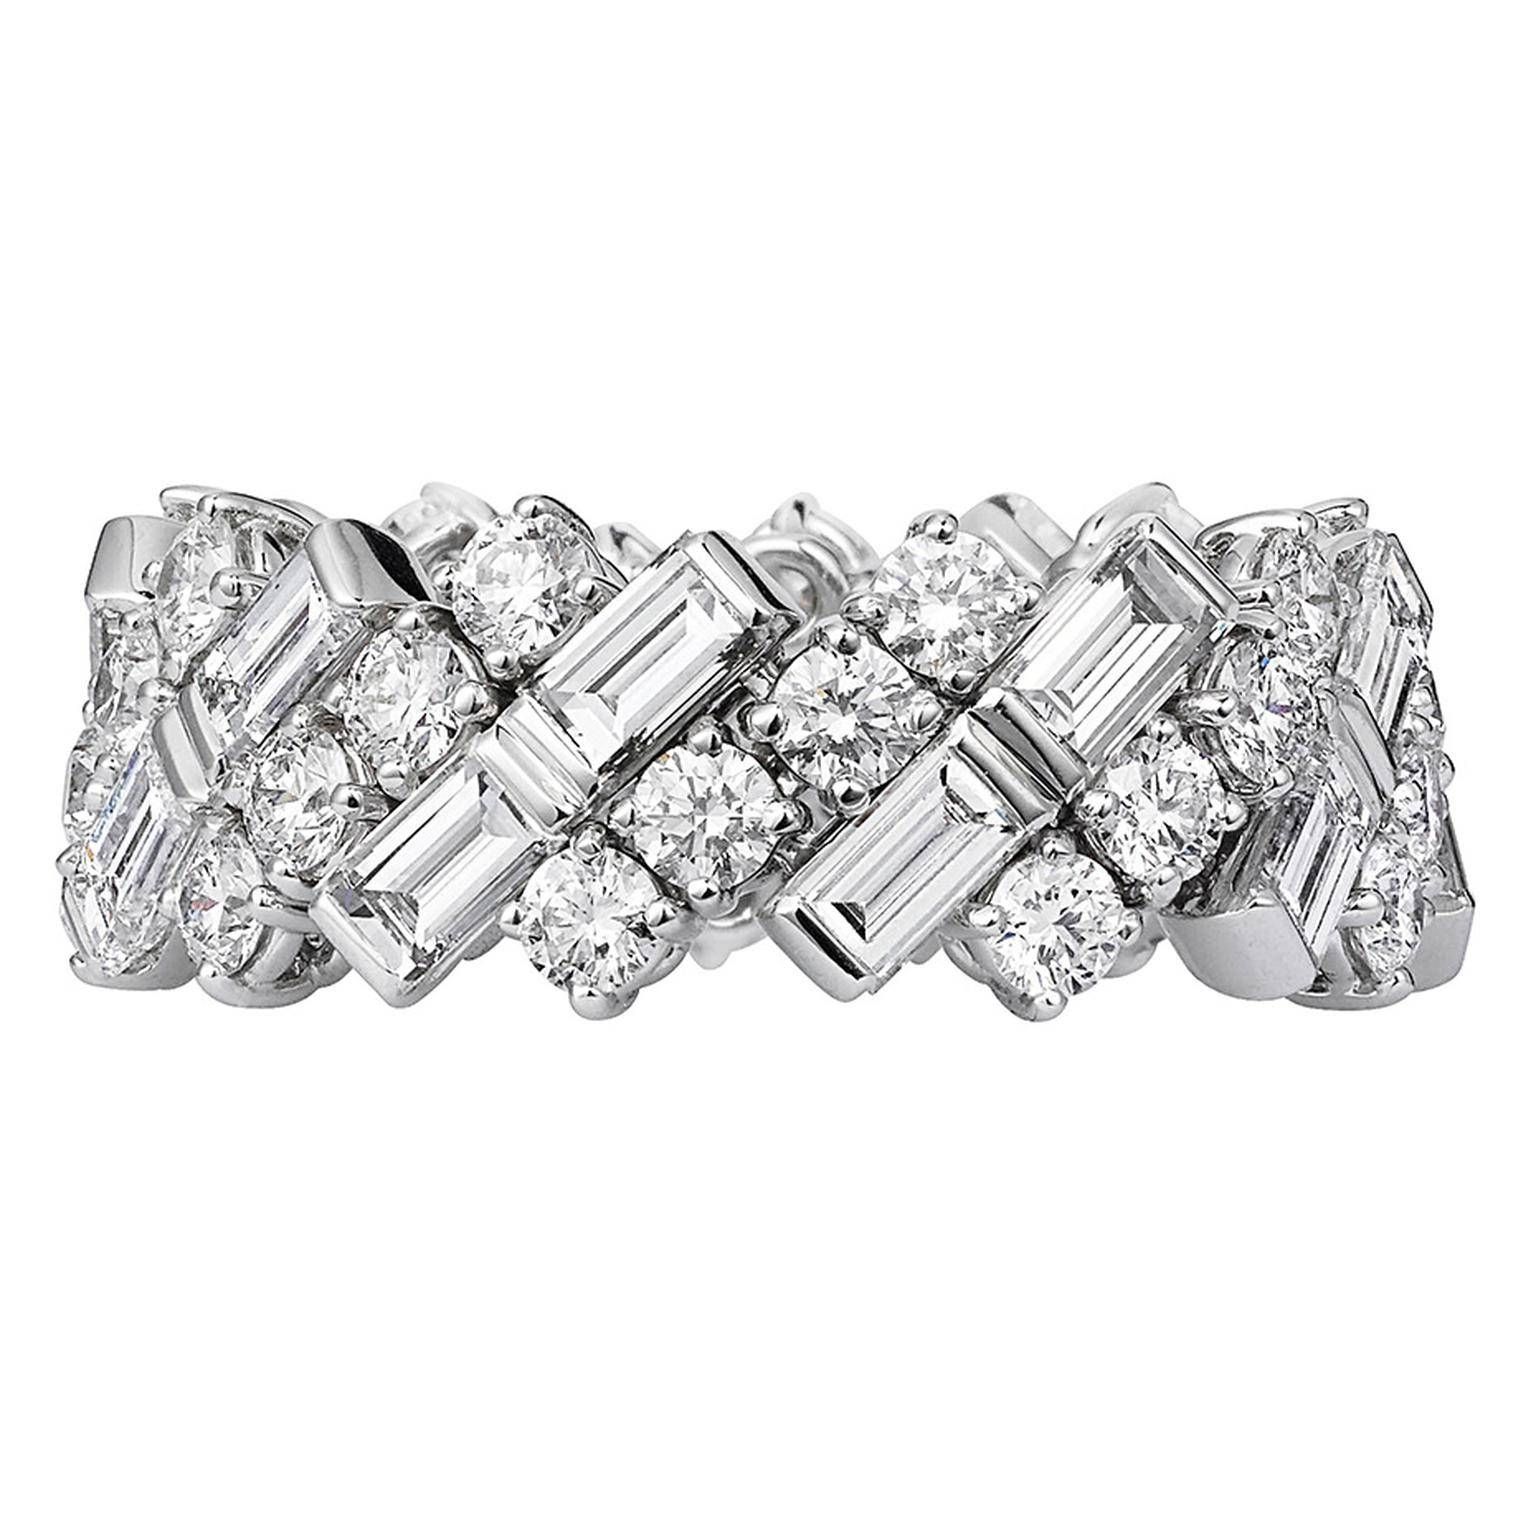 Creative Collection Wedding Band In White Gold And Diamonds Inside Cartier White Gold Wedding Bands (View 11 of 15)